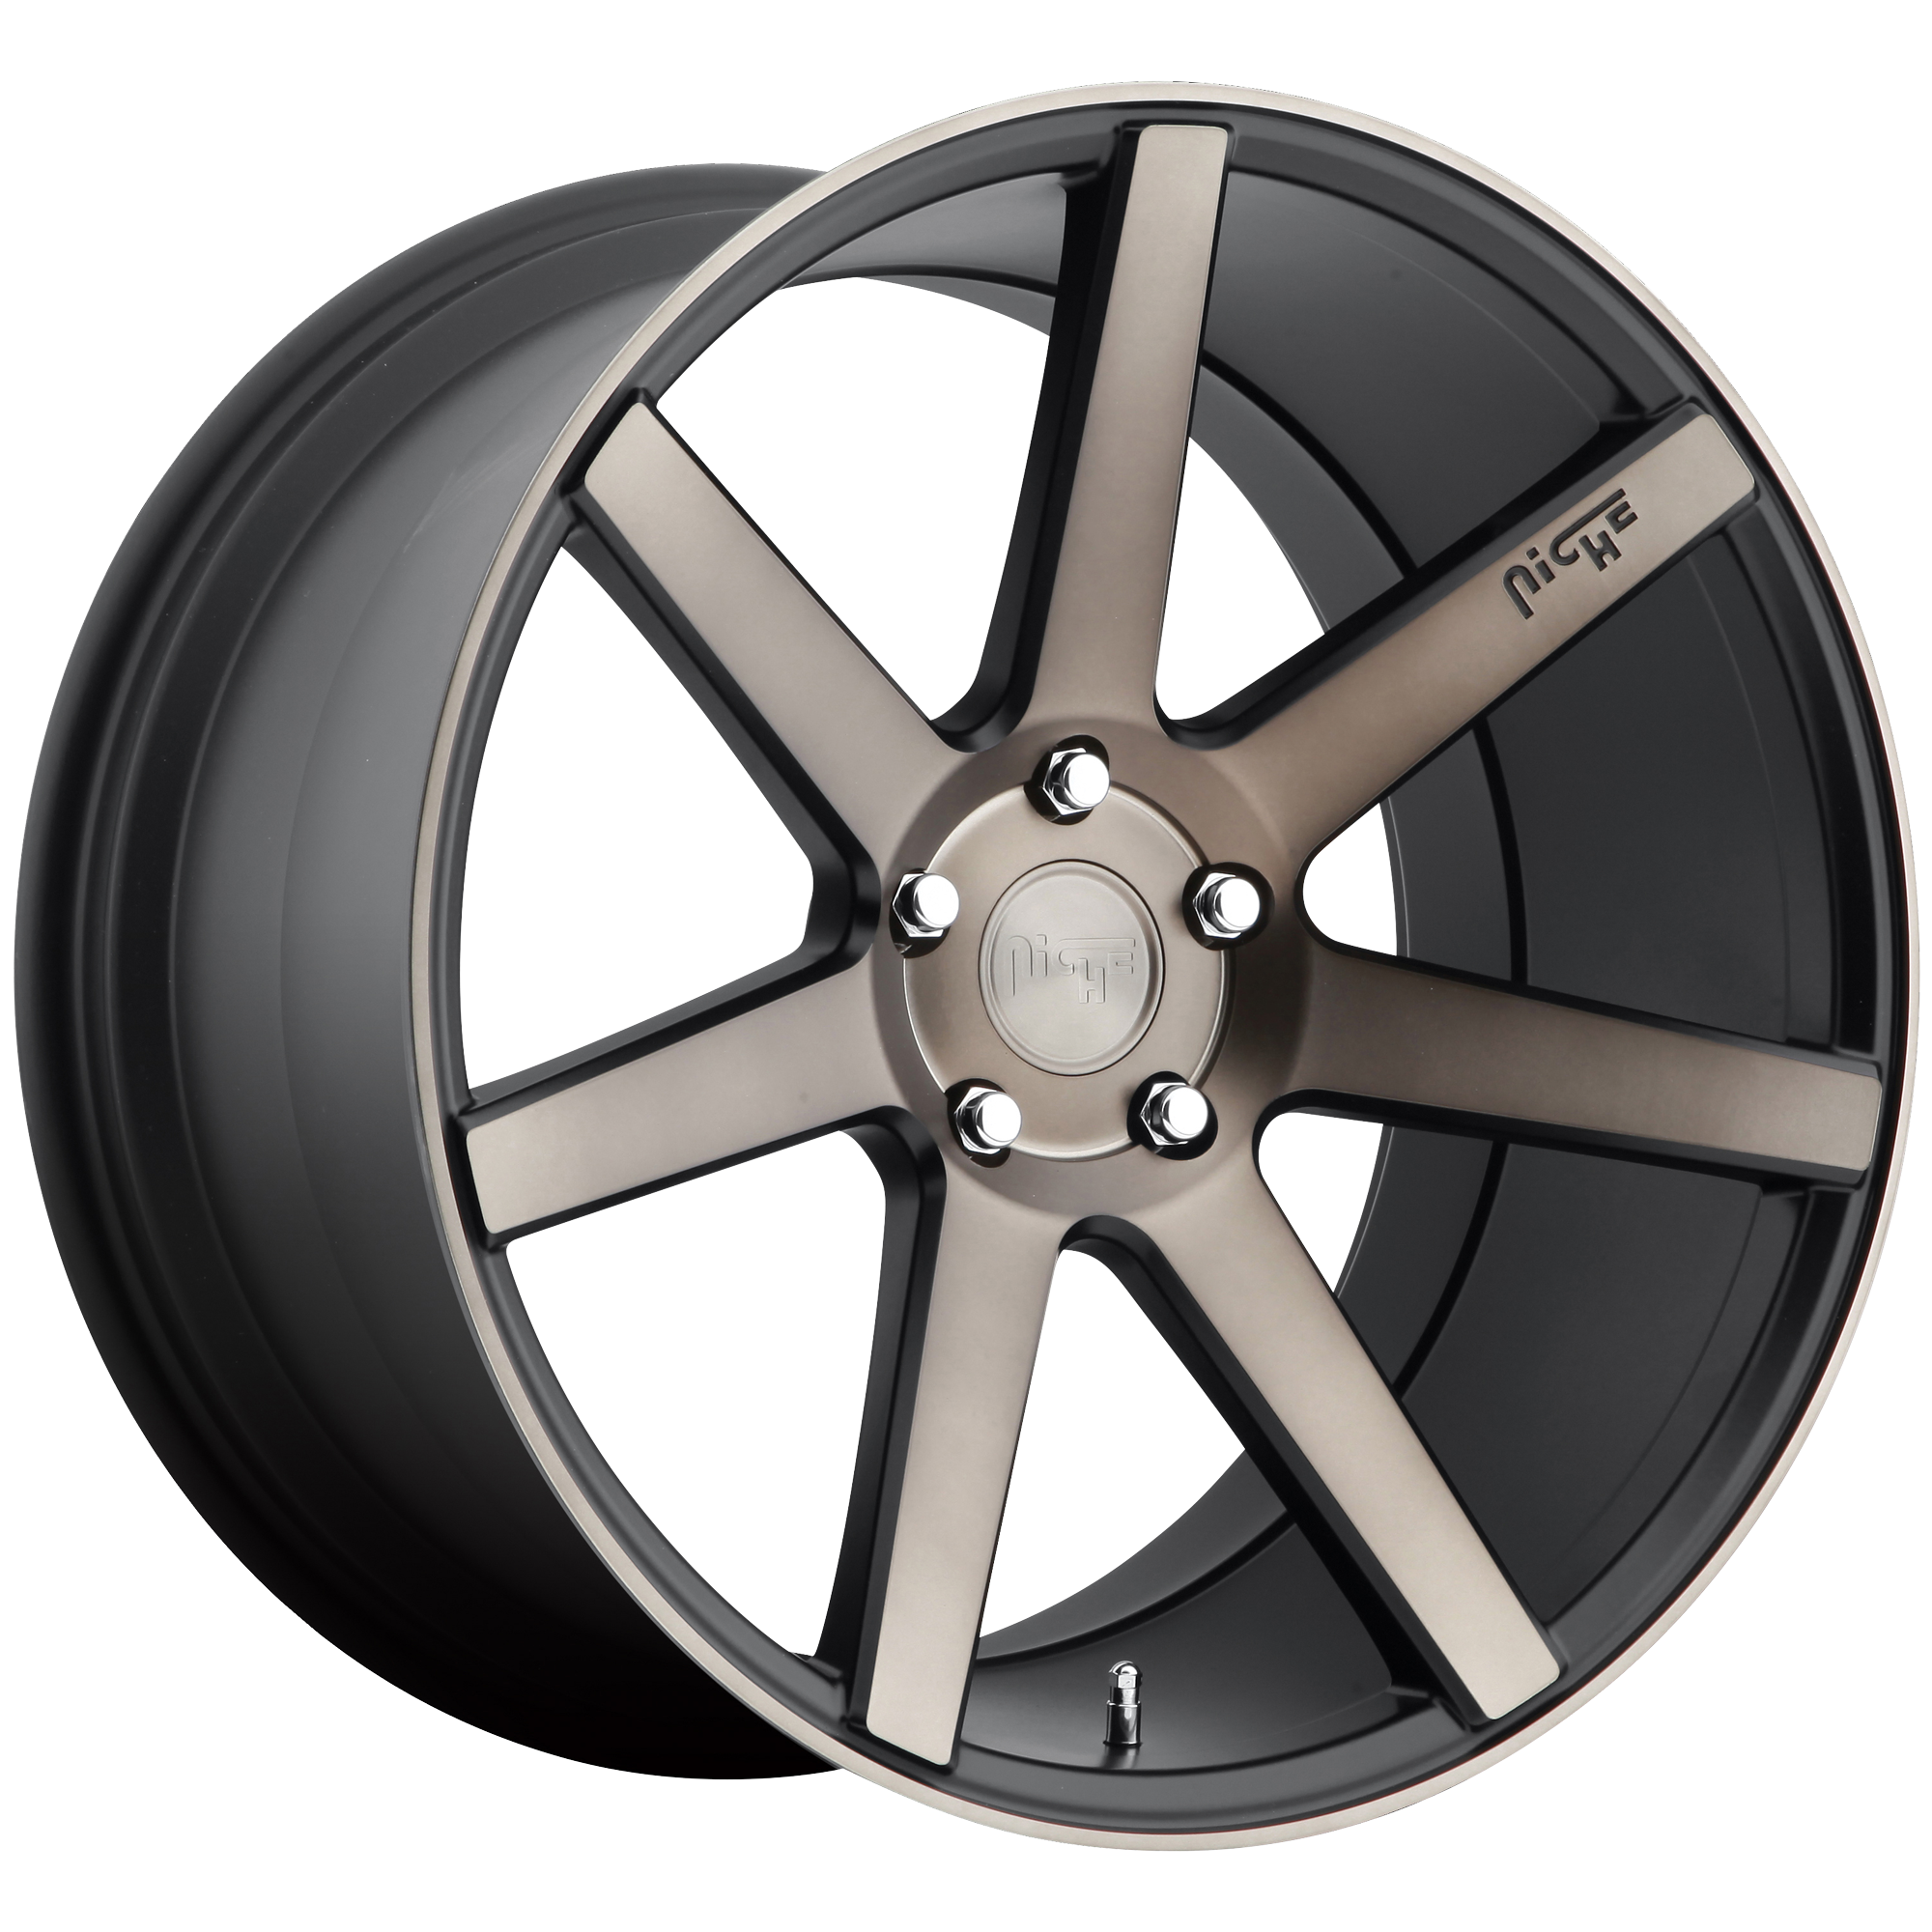 VERONA 18x8 5x120.00 MATTE BLACK MACHINED (40 mm) - Tires and Engine Performance